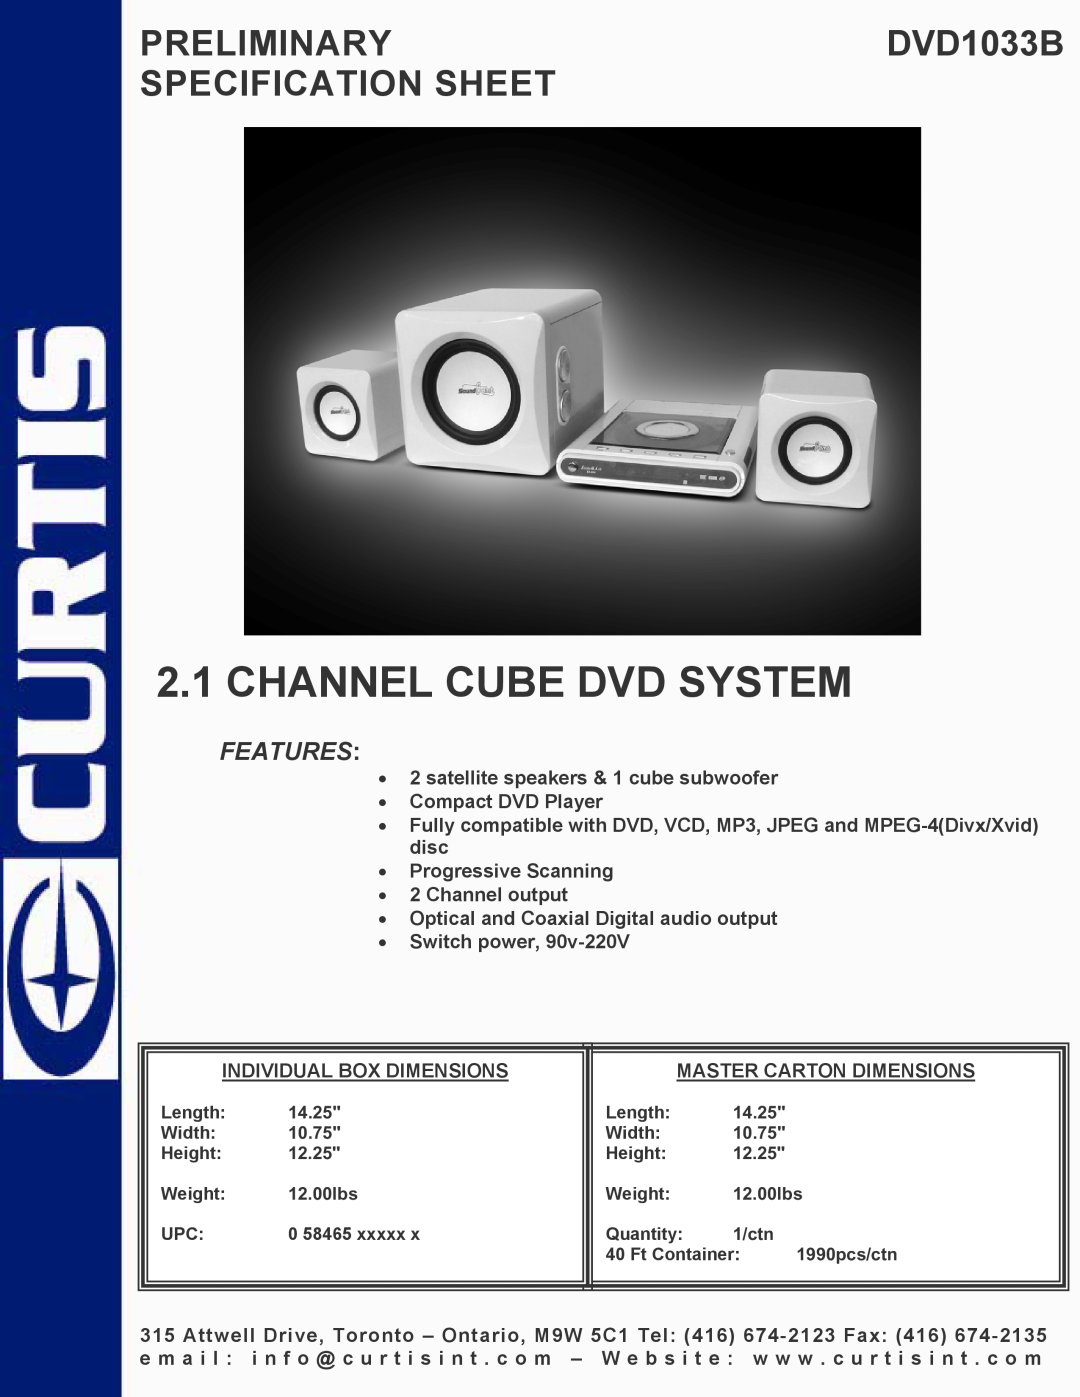 Curtis specifications Channel Cube Dvd System, PRELIMINARYDVD1033B SPECIFICATION SHEET, Features 